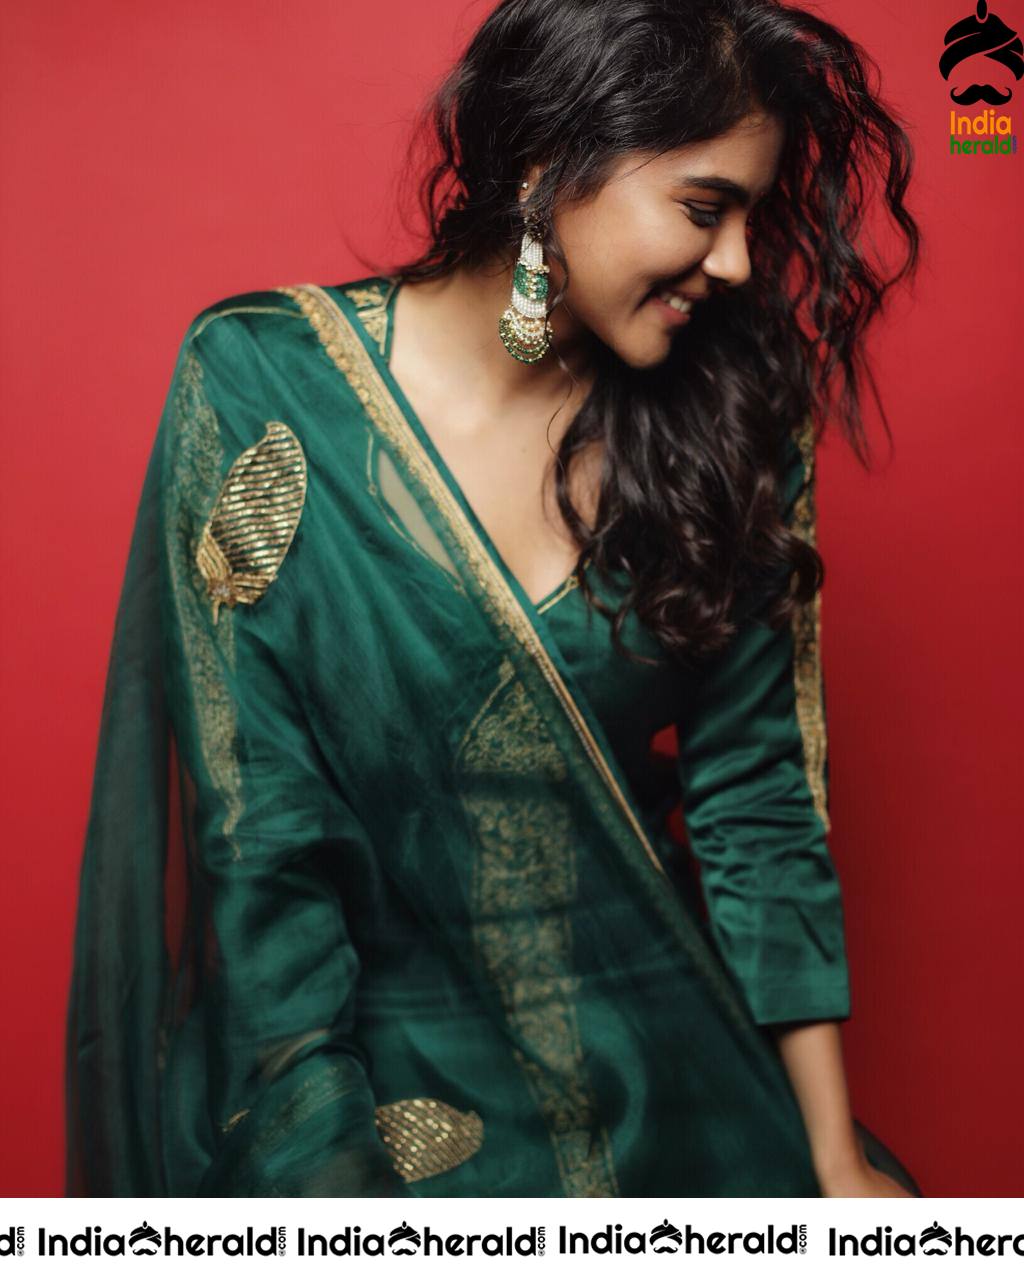 Kalyani Priyadarshan Seduces with her Beauty and Flawless SMile